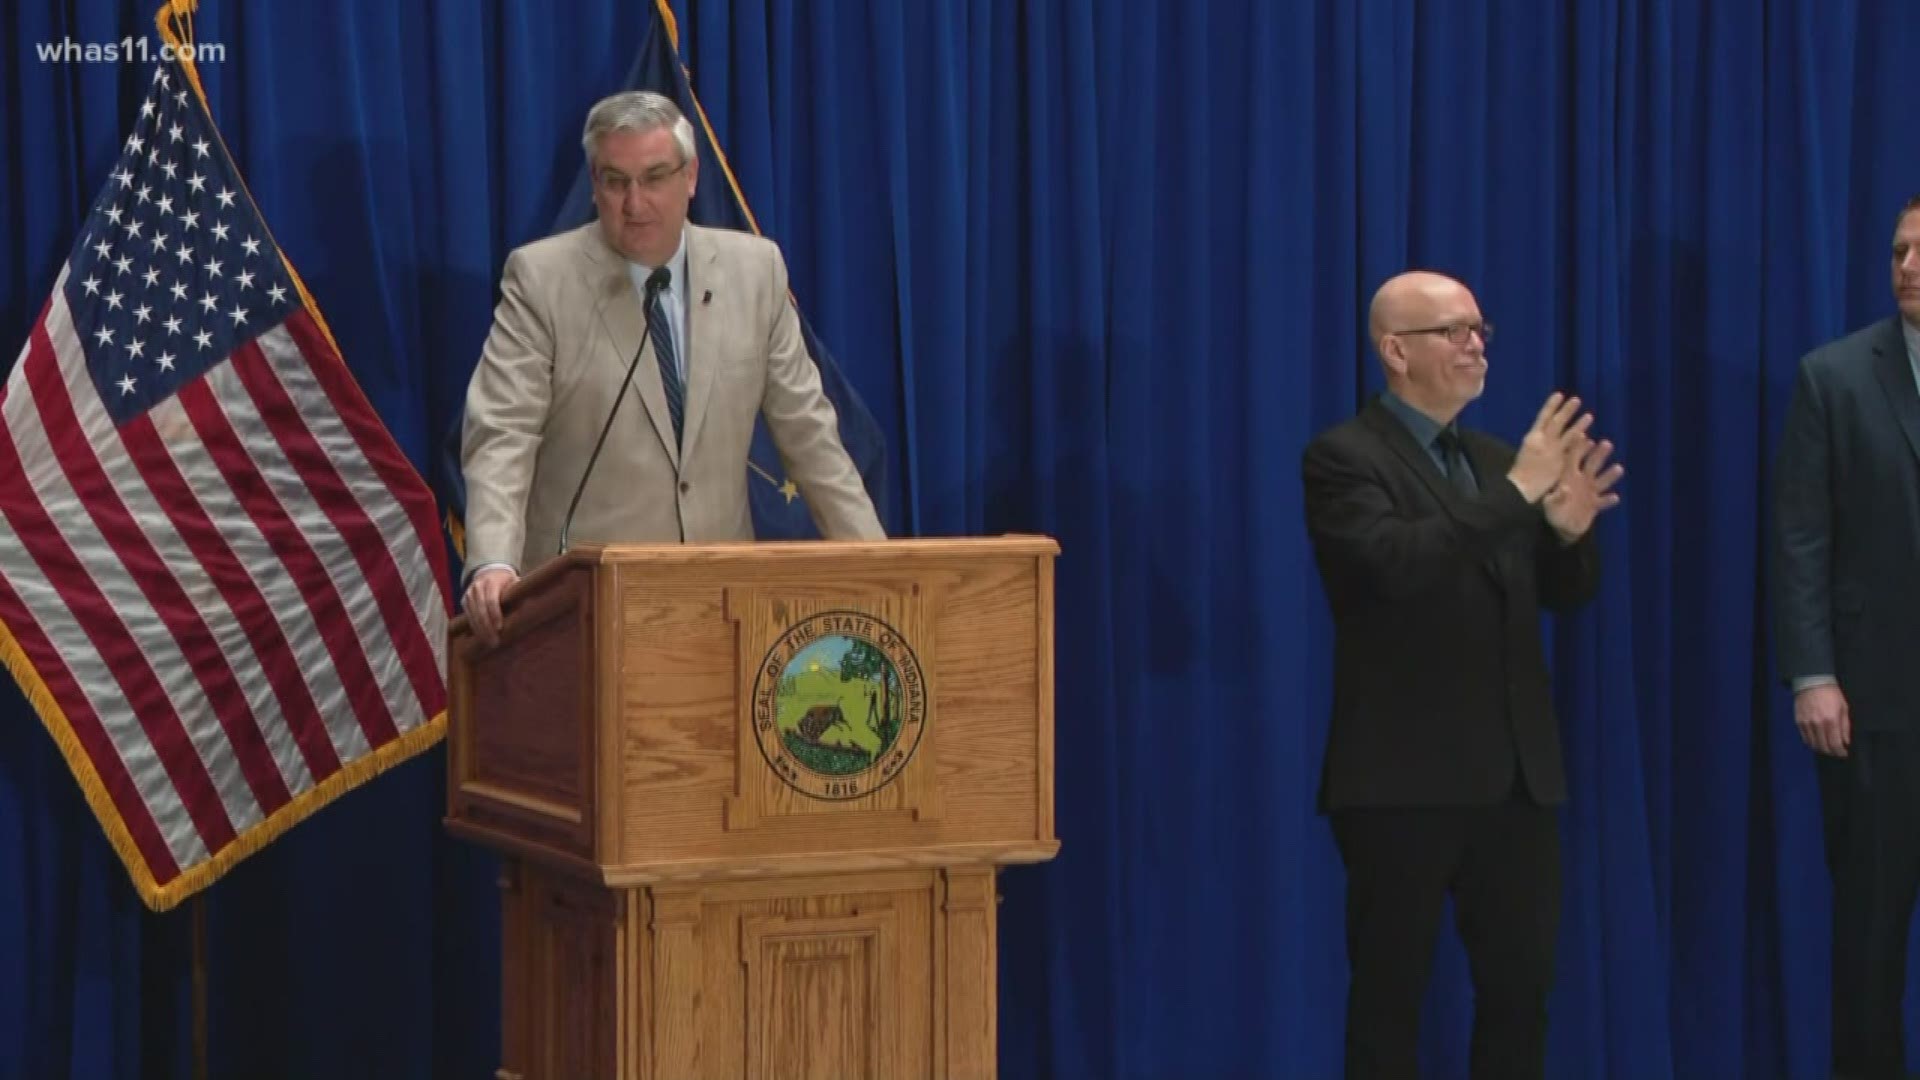 Governor Holcomb announced Indiana's state primary for the 2020 Presidential election will be moved from May 5 to June 2.